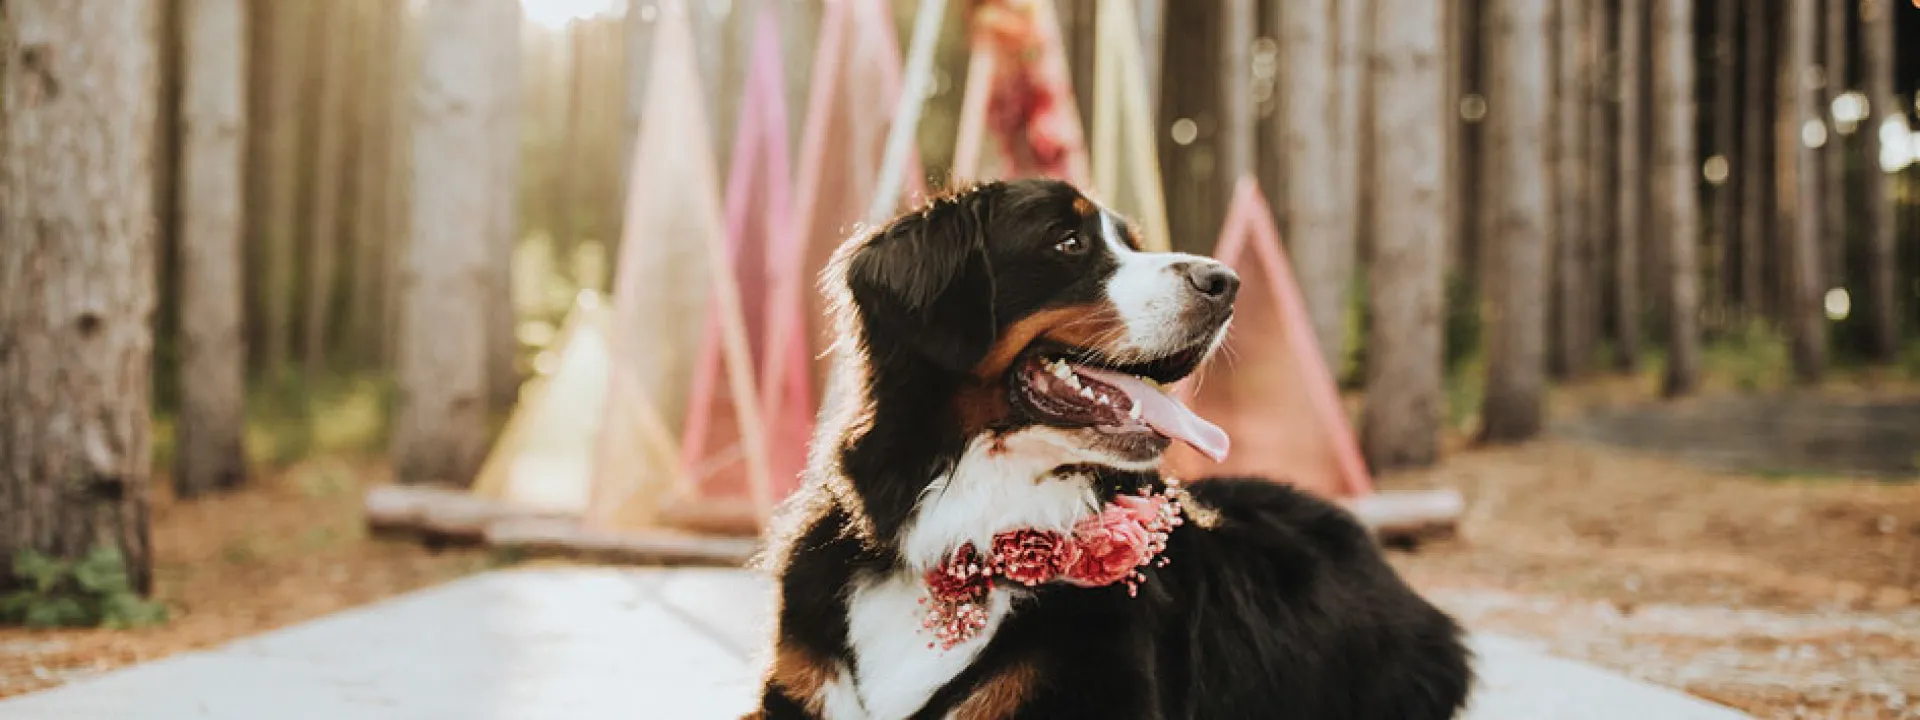 Wedding pup Denali sits patiently at Pinewood Weddings & Events with a floral collar by Studio C Floral.